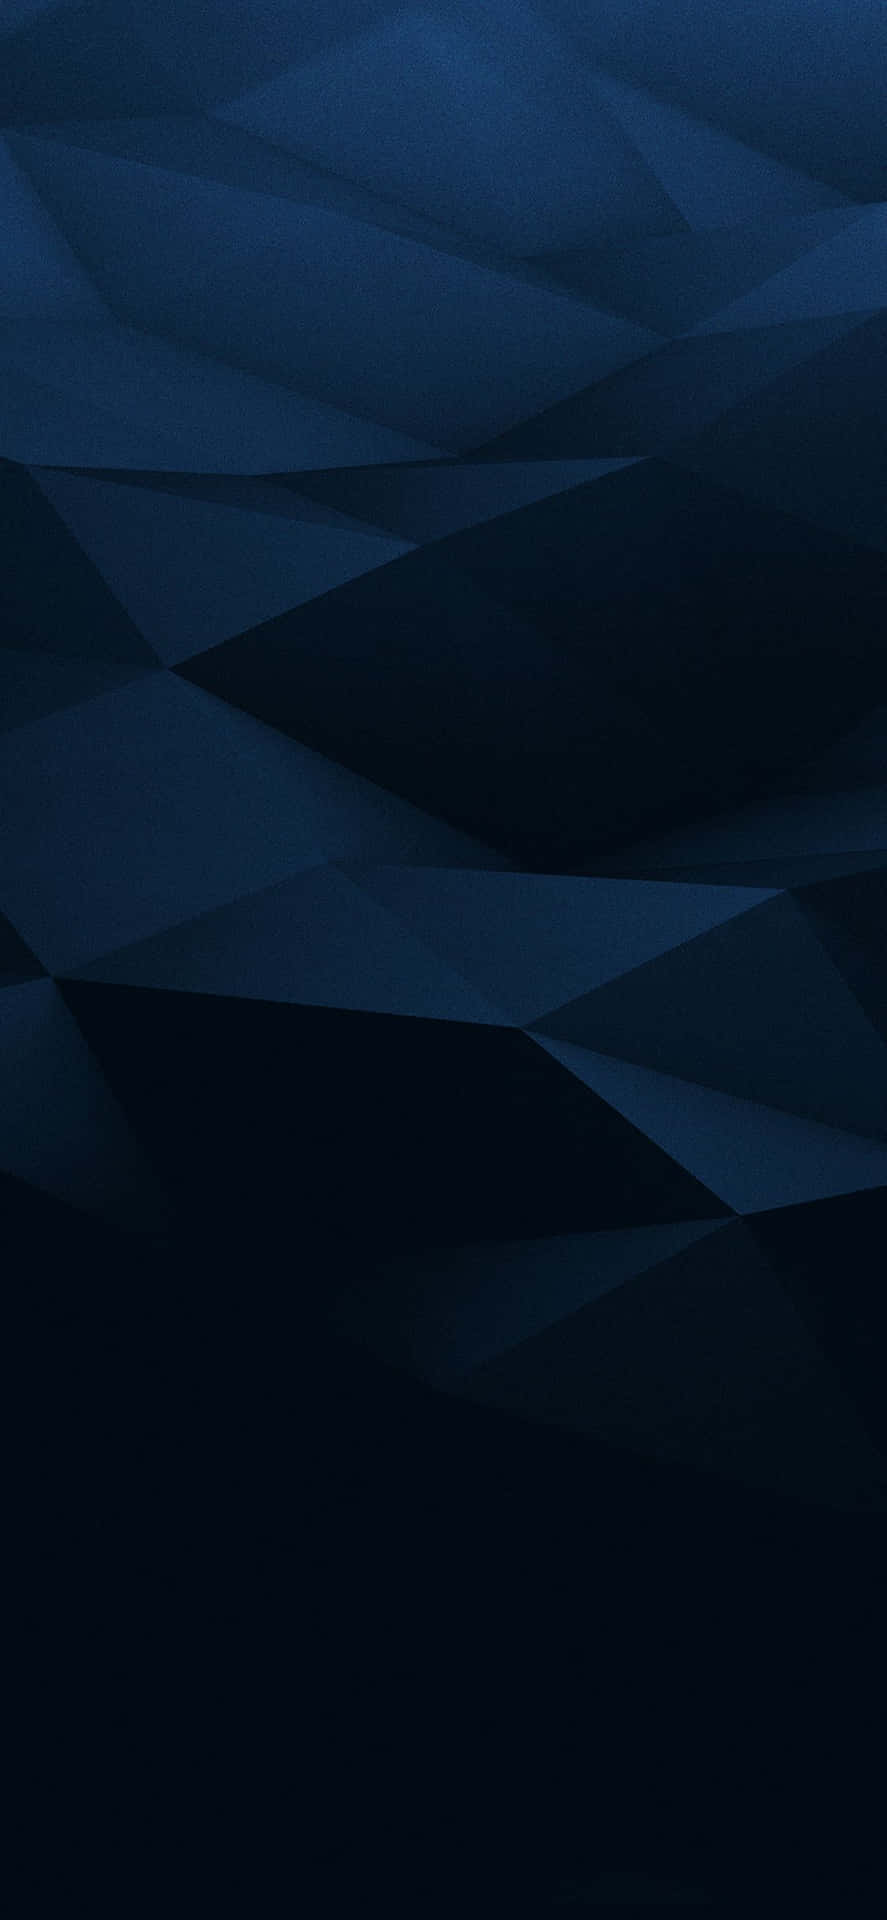 The perfect, sleek combination of black and blue - the iPhone Wallpaper